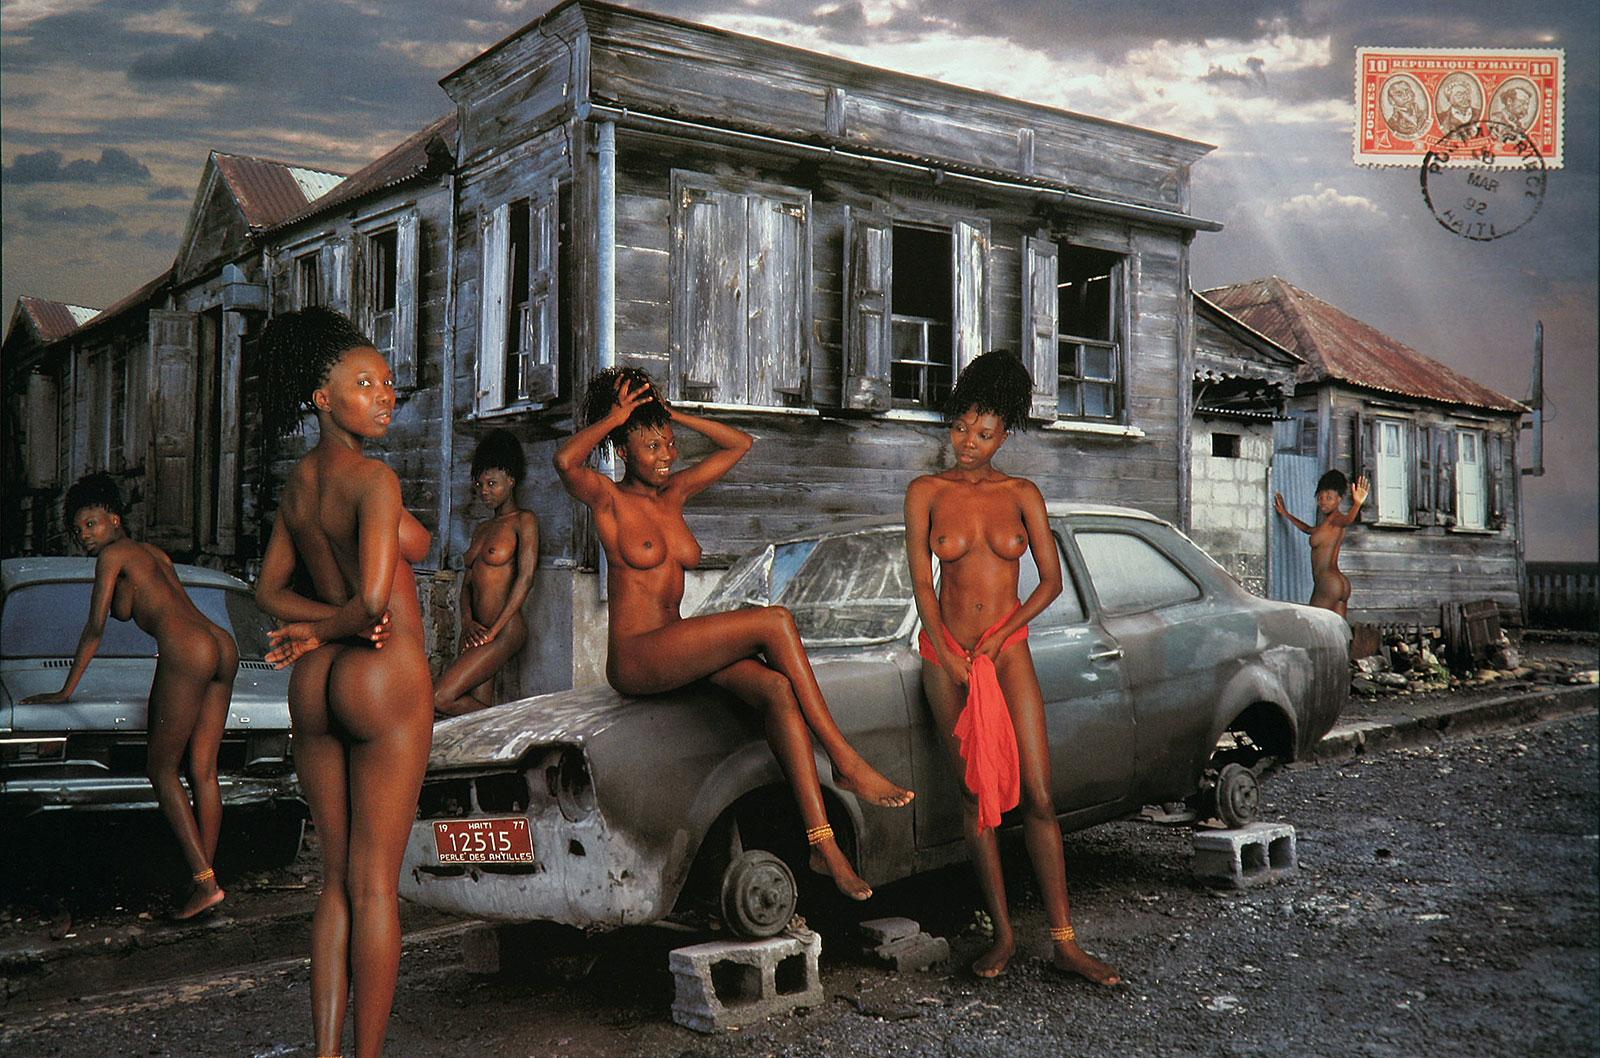 Uwe Ommer Color Photograph - Haiti. From the Mani- Cartes Postales series. 